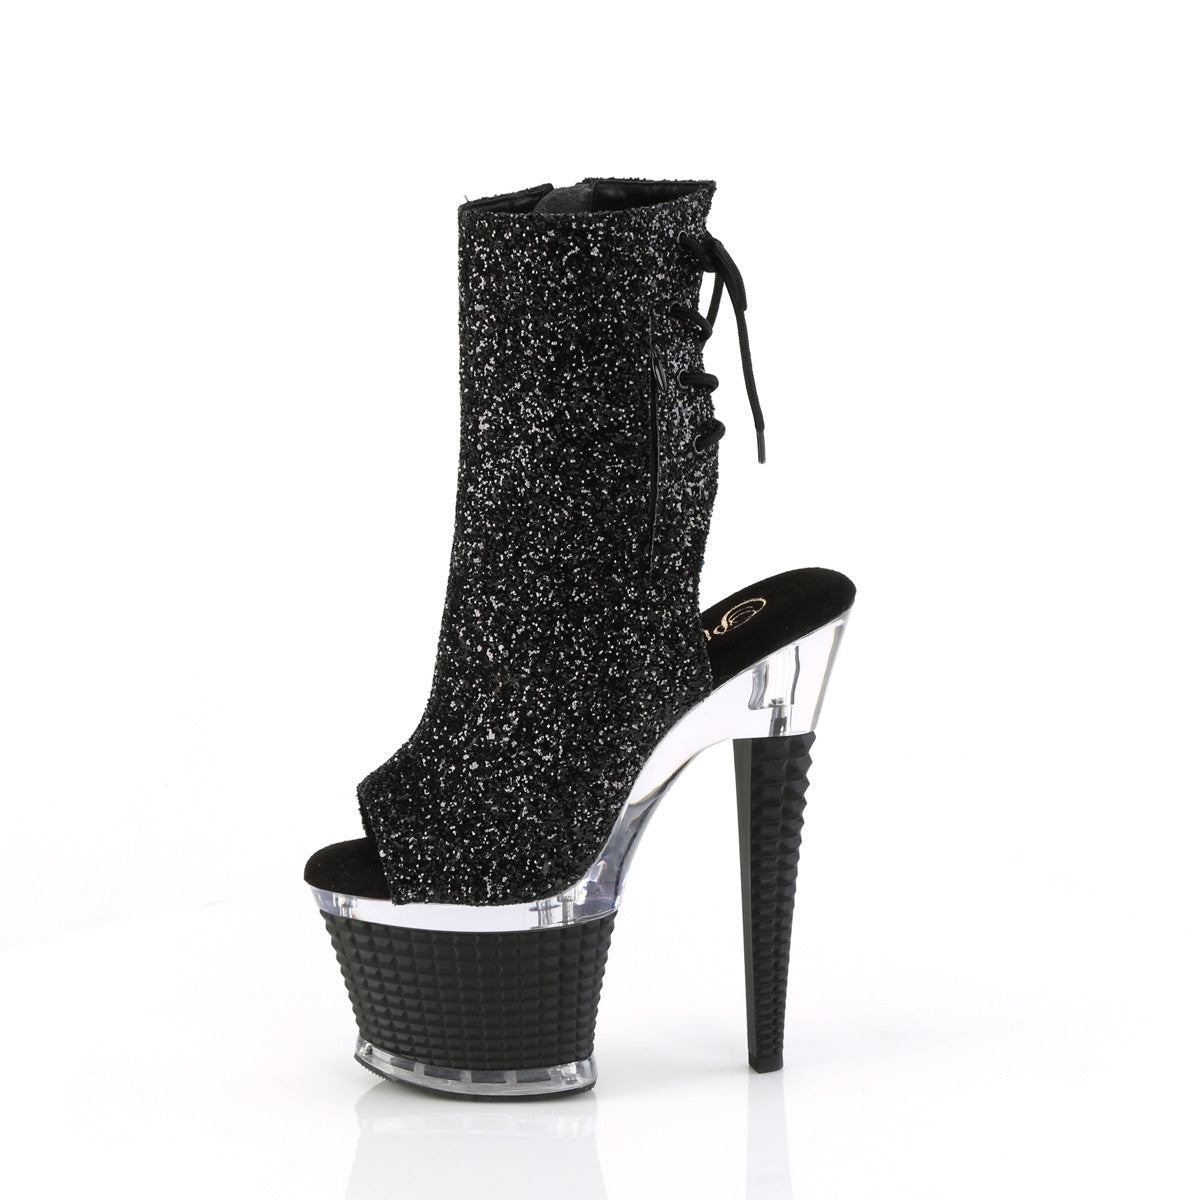 SPECTATOR-1018G Pleaser Black Glitter/Clear-Black Platform Shoes [Sexy Ankle Boots]